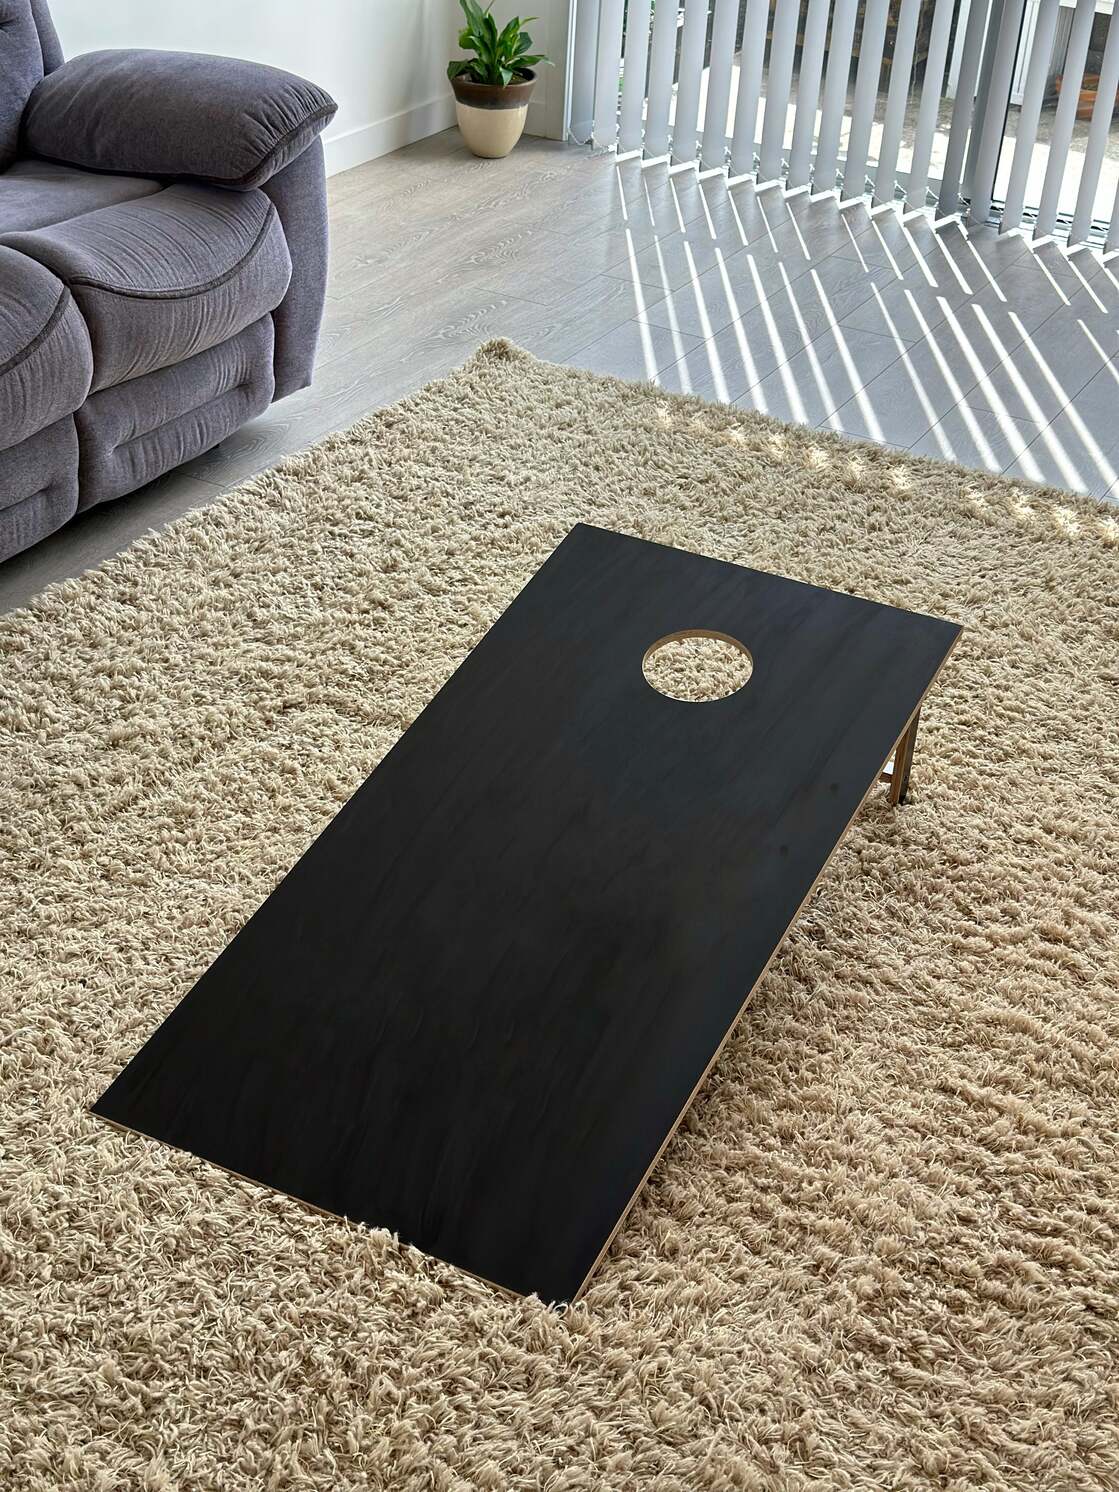 Bring home the popular Cornhole game with our plywood set. Perfect for family gatherings, indoors or out.